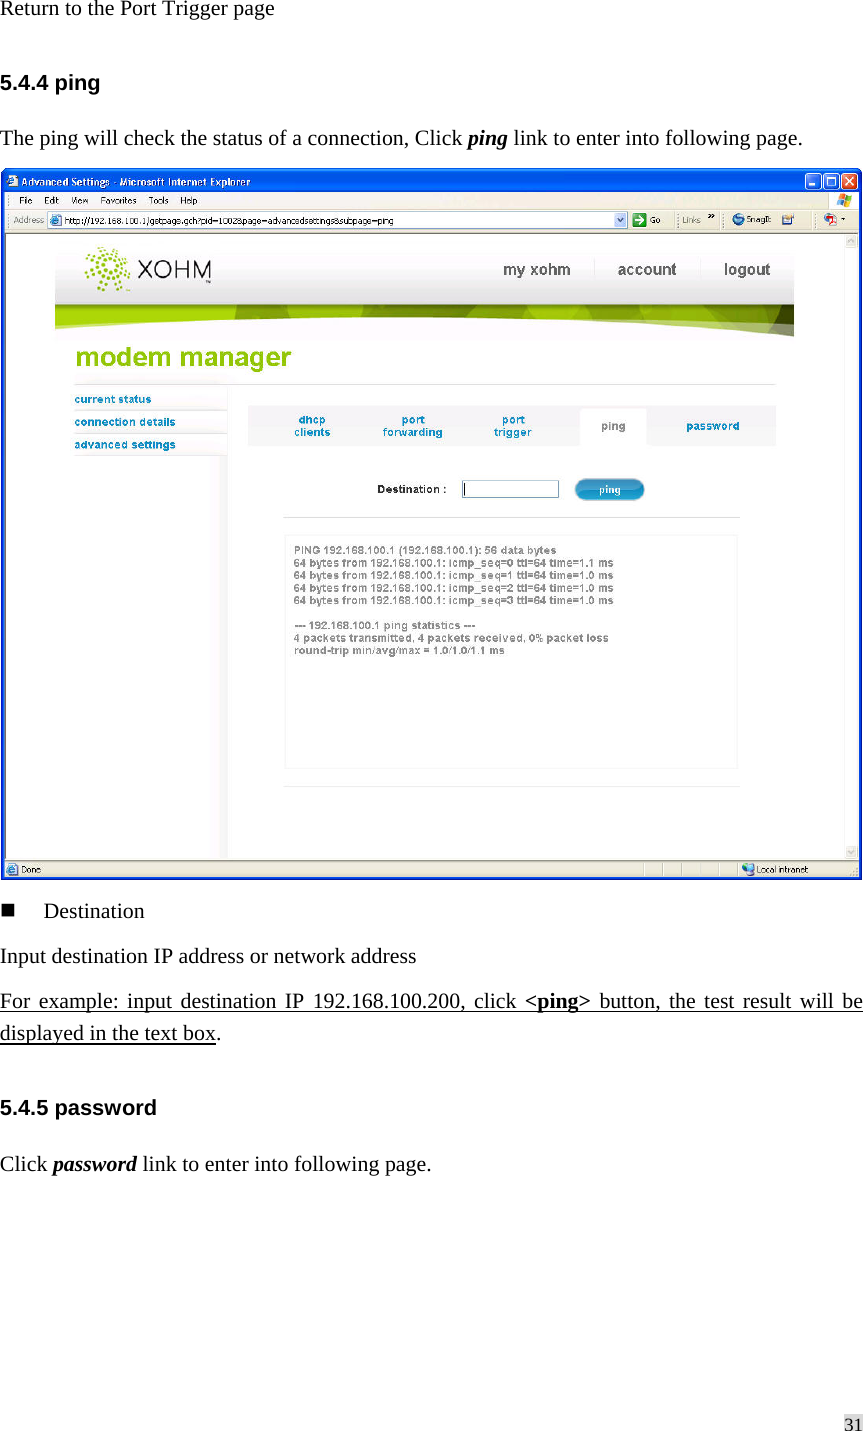 31  Return to the Port Trigger page 5.4.4 ping The ping will check the status of a connection, Click ping link to enter into following page.    Destination Input destination IP address or network address For example: input destination IP 192.168.100.200, click &lt;ping&gt; button, the test result will be displayed in the text box. 5.4.5 password Click password link to enter into following page. 